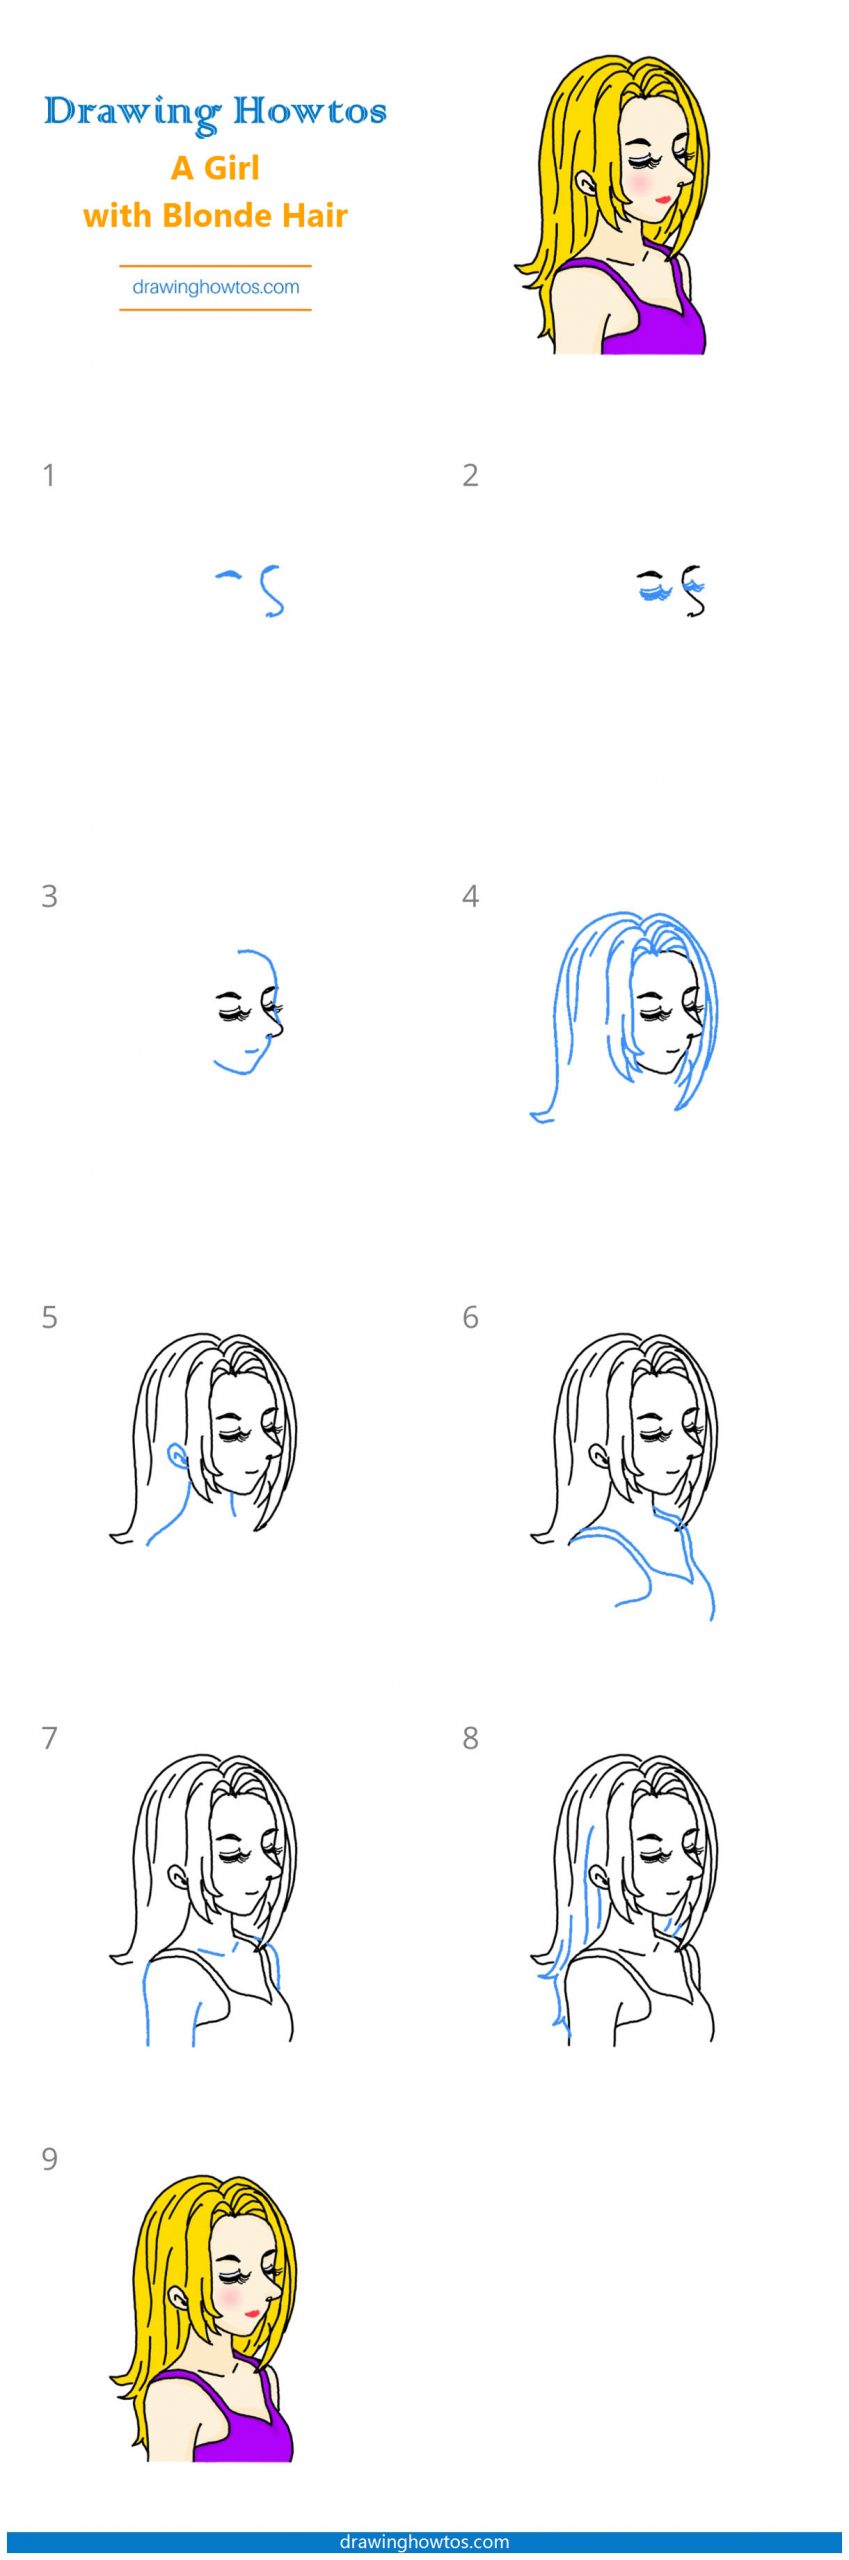 How to Draw a Girl with Blonde Hair Step by Step